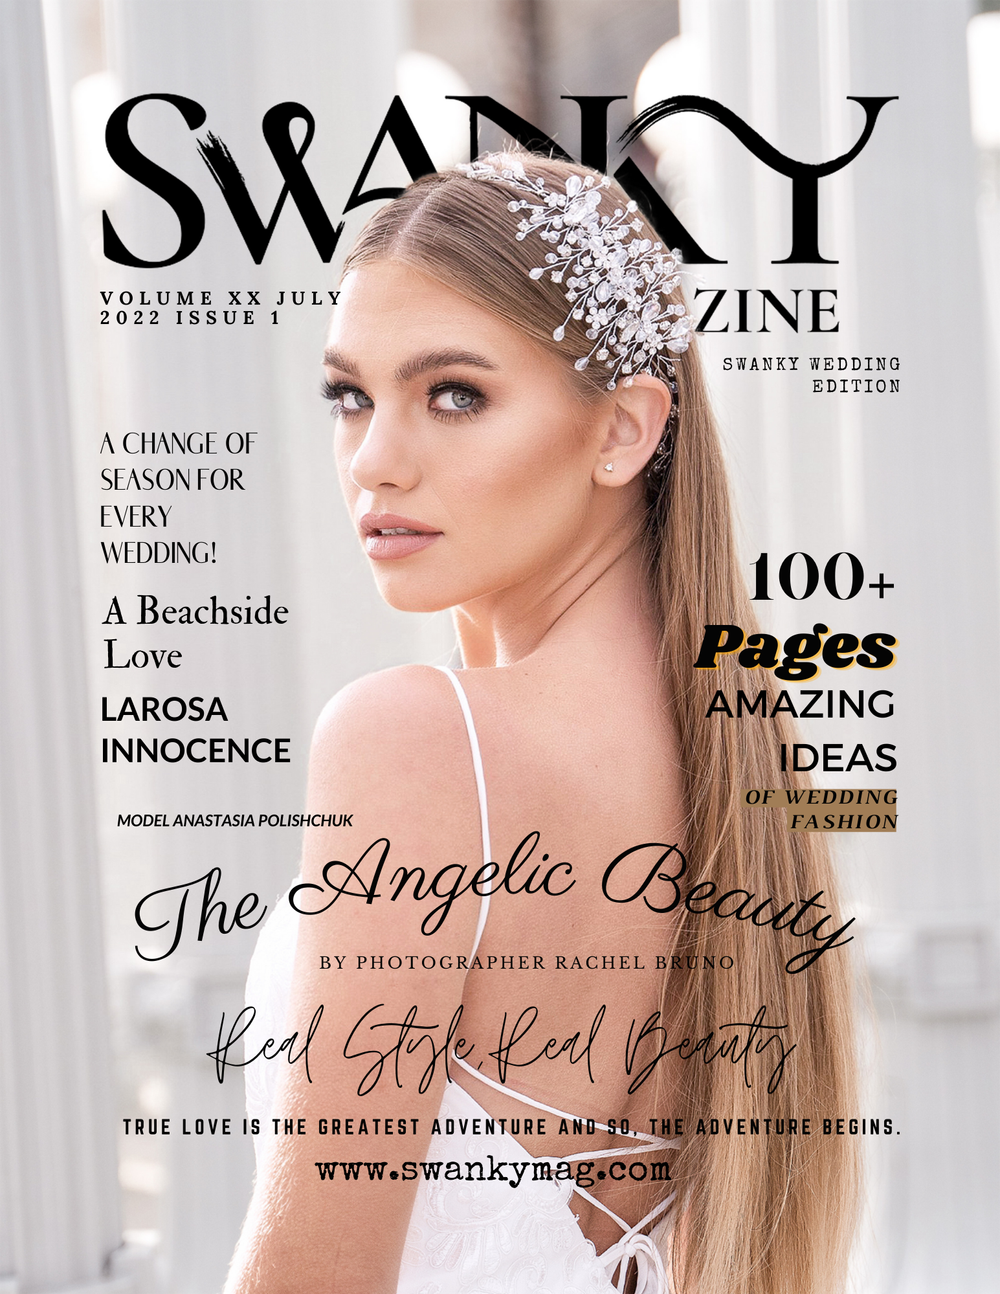 Swanky Wedding Editions JULY VOL XX Issue 1 - PRINT ISSUE